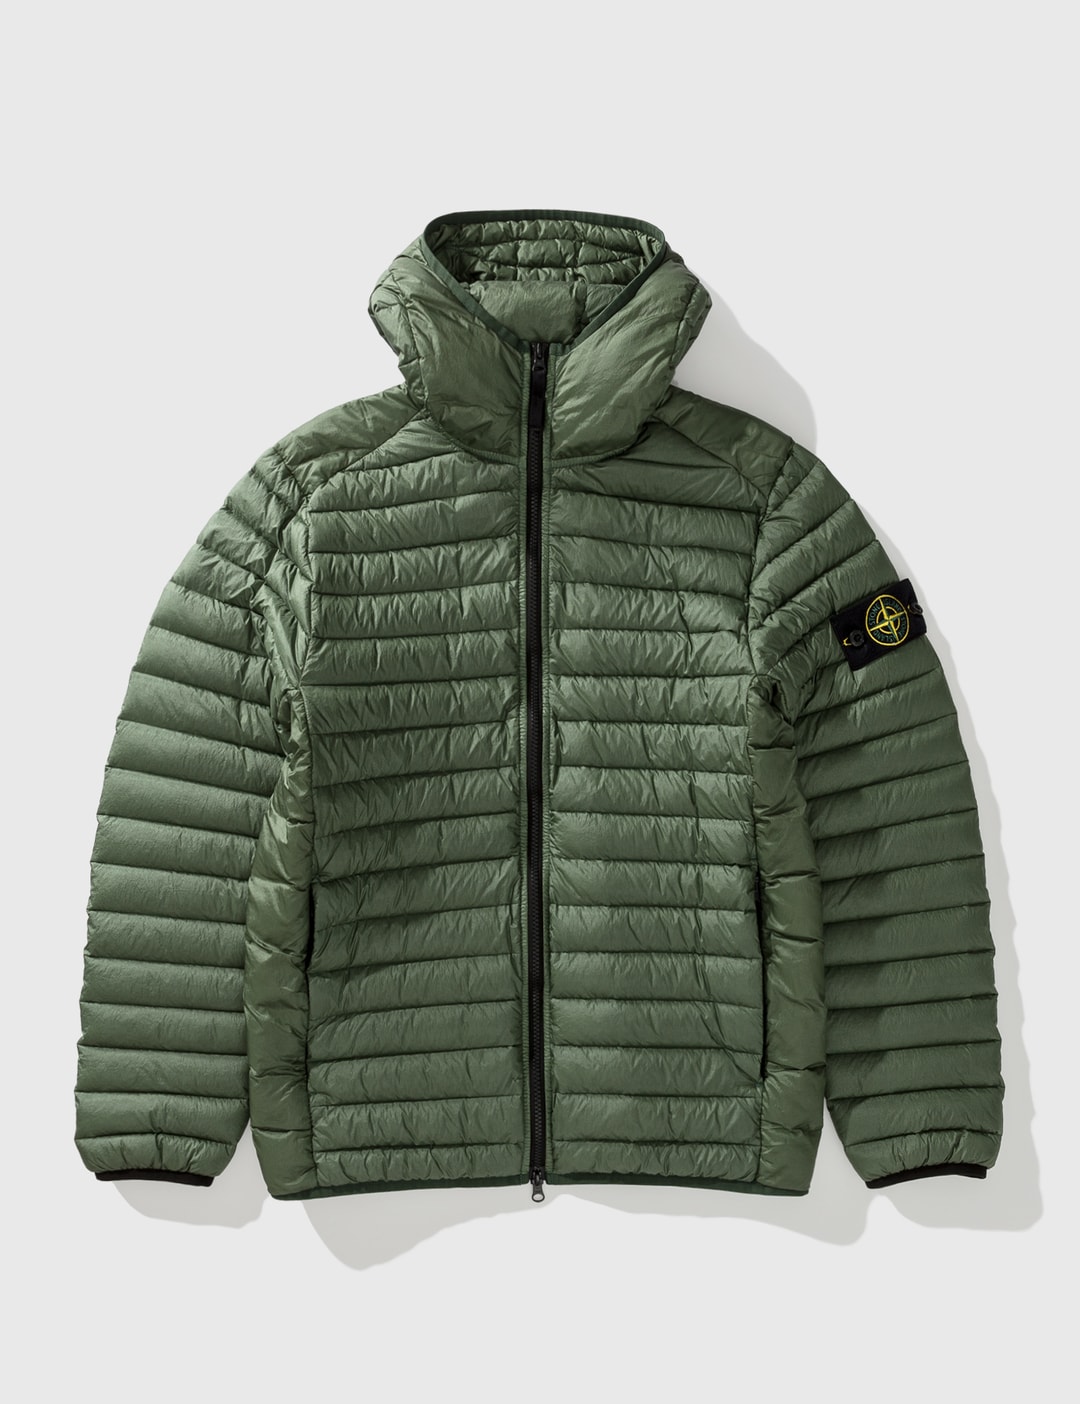 Trunk bibliotheek historisch Netjes Stone Island - R-Nylon Hooded Down Jacket | HBX - Globally Curated Fashion  and Lifestyle by Hypebeast